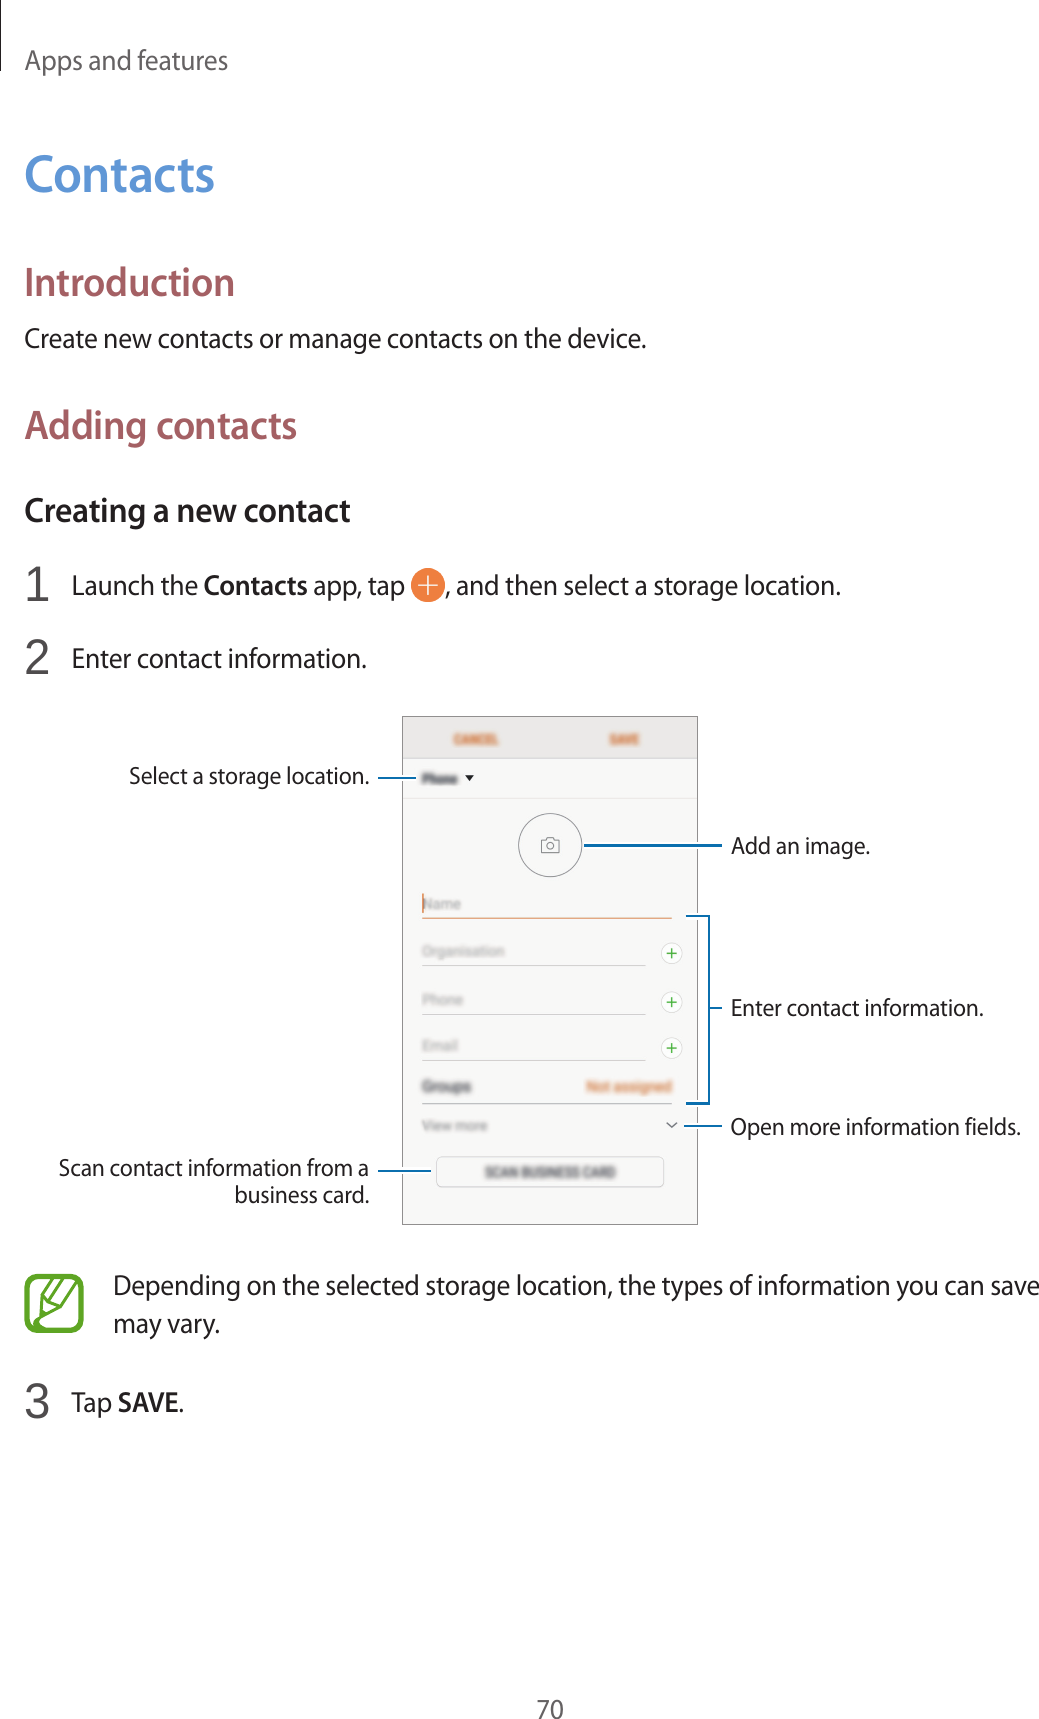 Apps and features70ContactsIntroductionCreate new contacts or manage contacts on the device.Adding contactsCreating a new contact1  Launch the Contacts app, tap  , and then select a storage location.2  Enter contact information.Select a storage location.Add an image.Open more information fields.Scan contact information from a business card.Enter contact information.Depending on the selected storage location, the types of information you can save may vary.3  Tap SAVE.